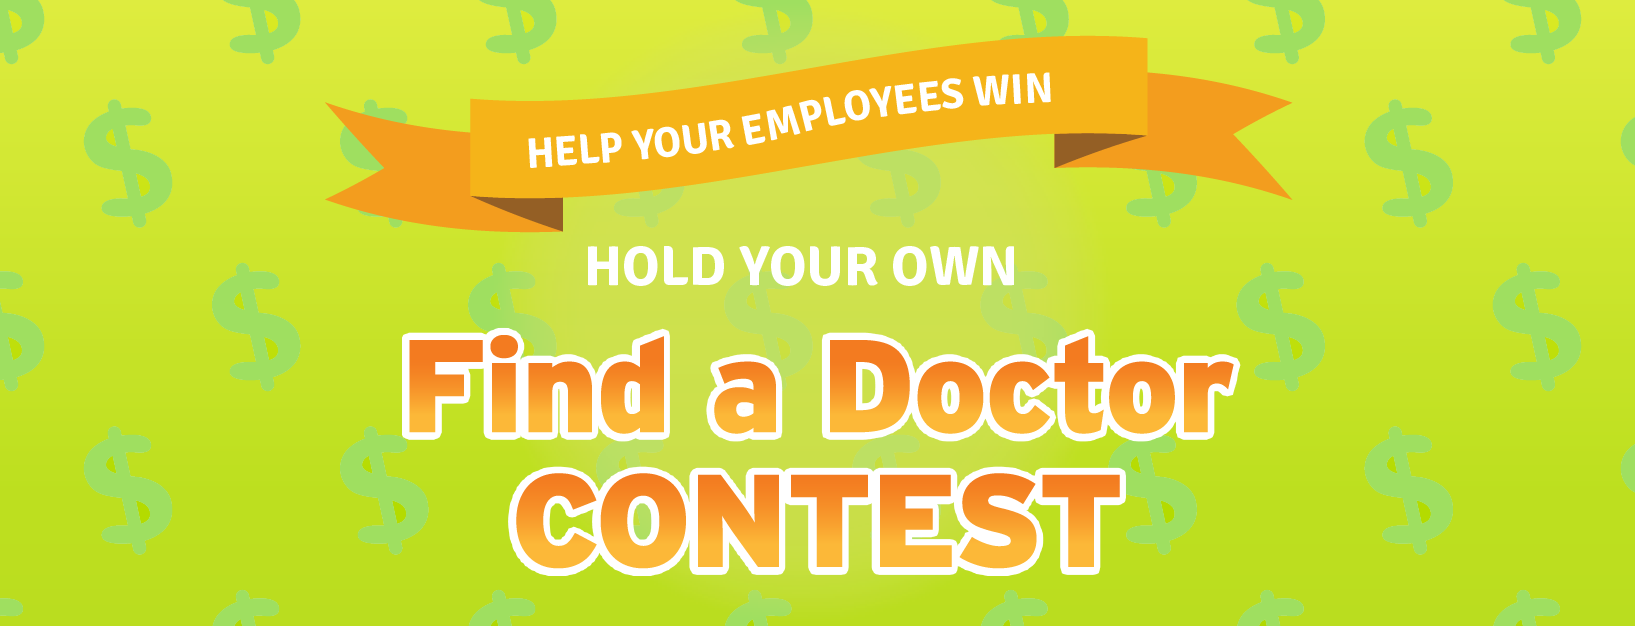 Find A Doctor And Win - Poster (1635x626)